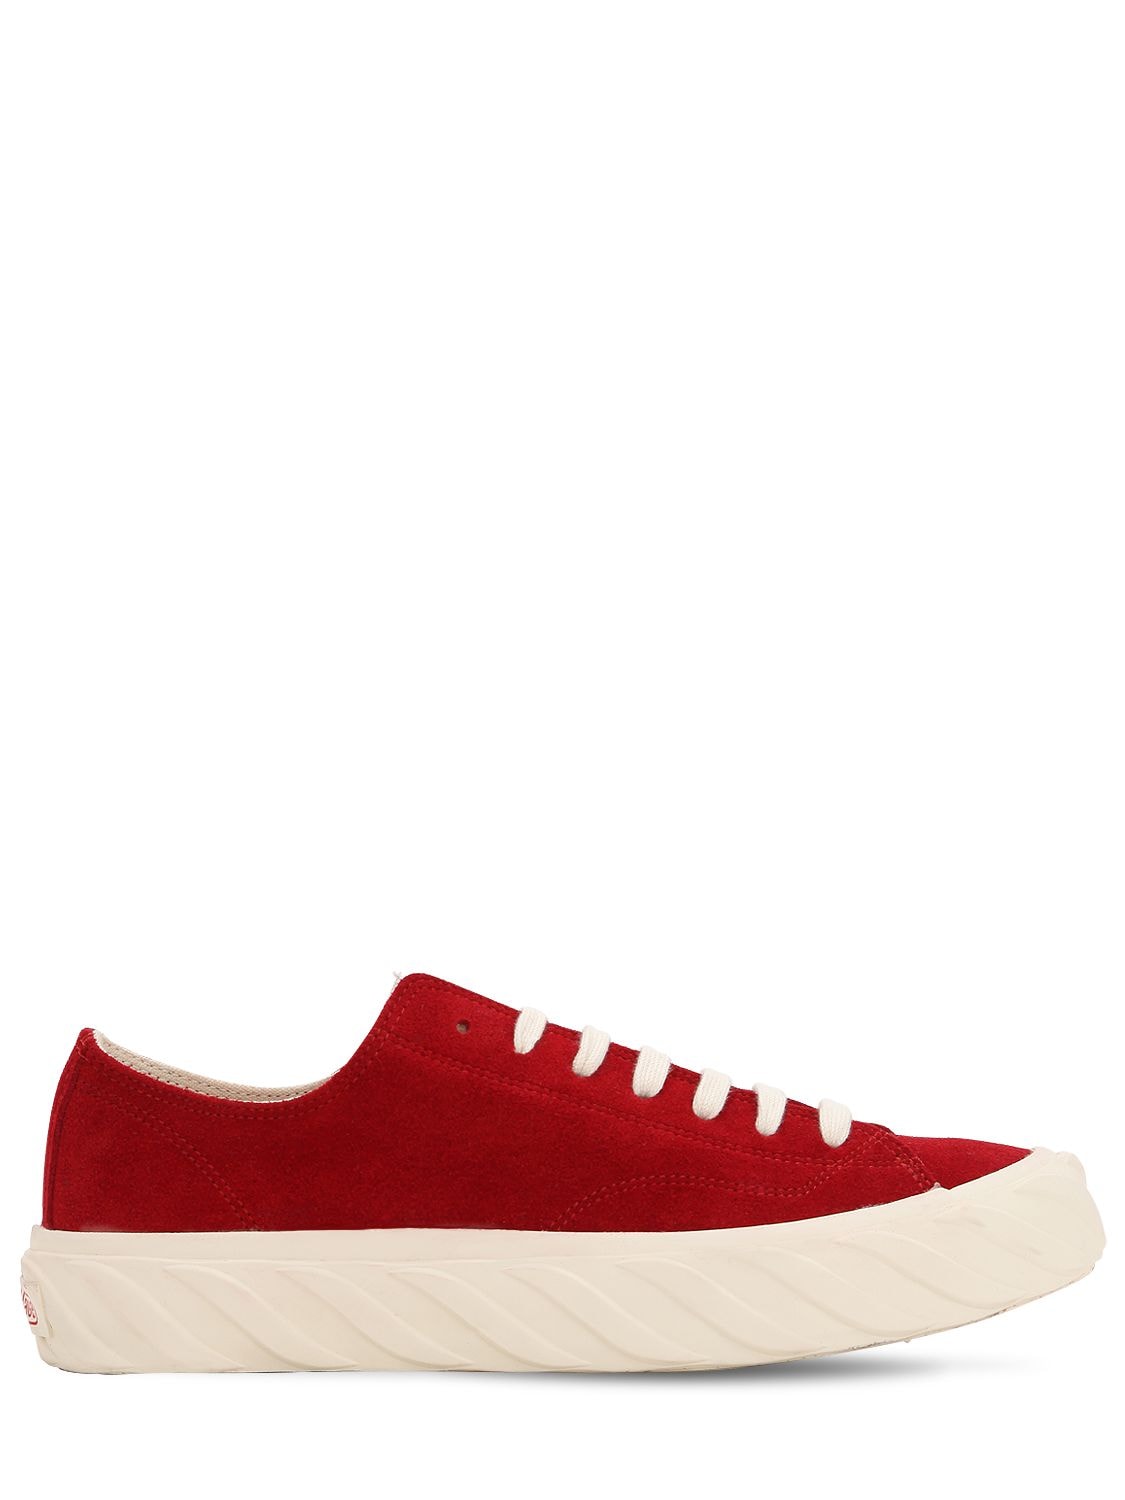 Age - Across To Genuine Era Cotton Canvas Sneakers In Red